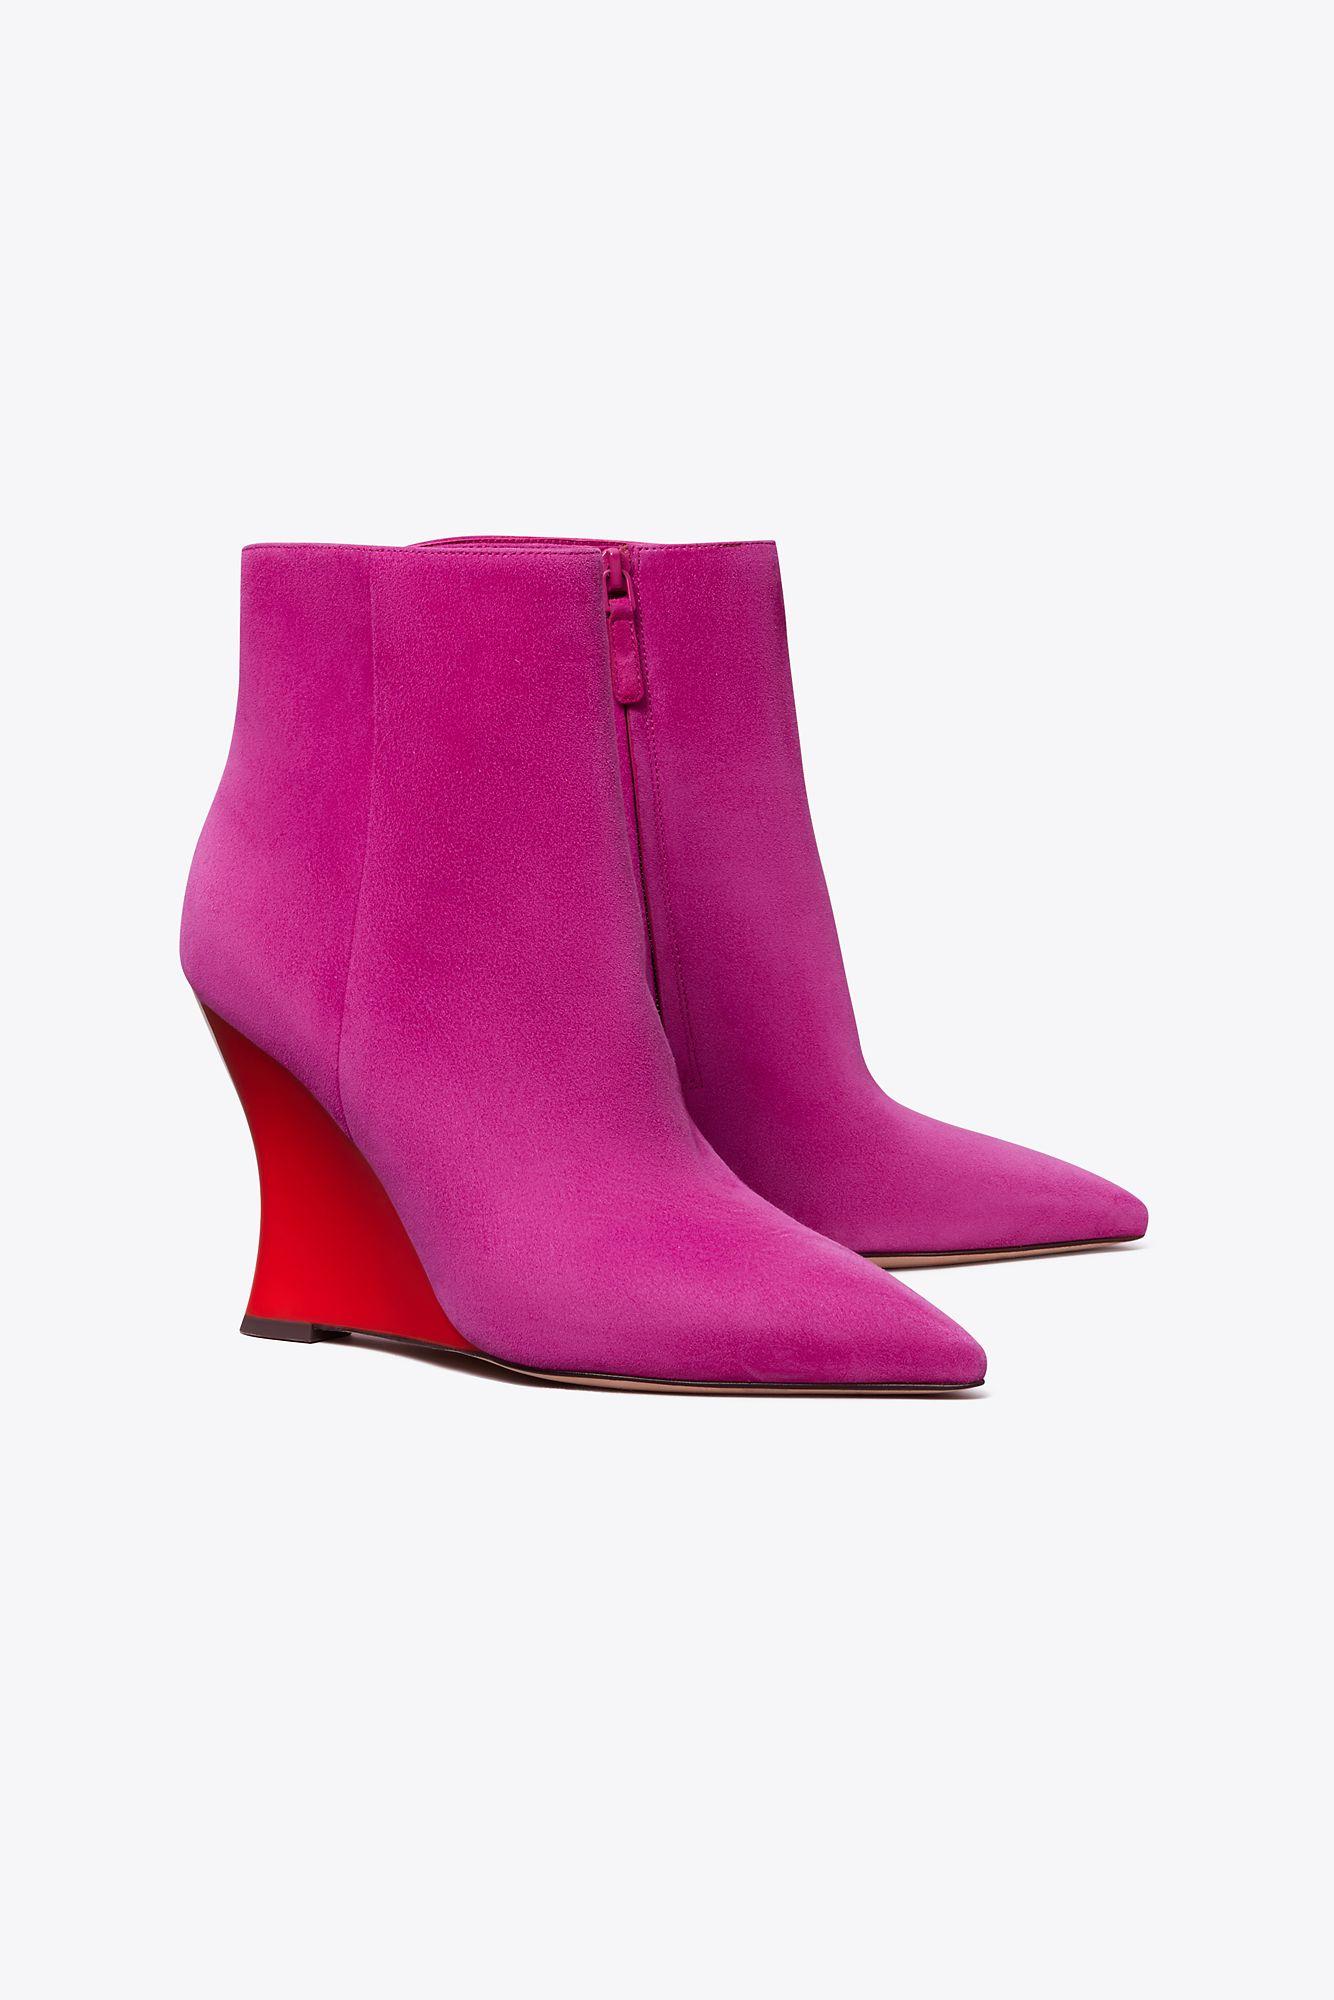 Tory Burch Sculpted Wedge Ankle Boot in Pink | Lyst